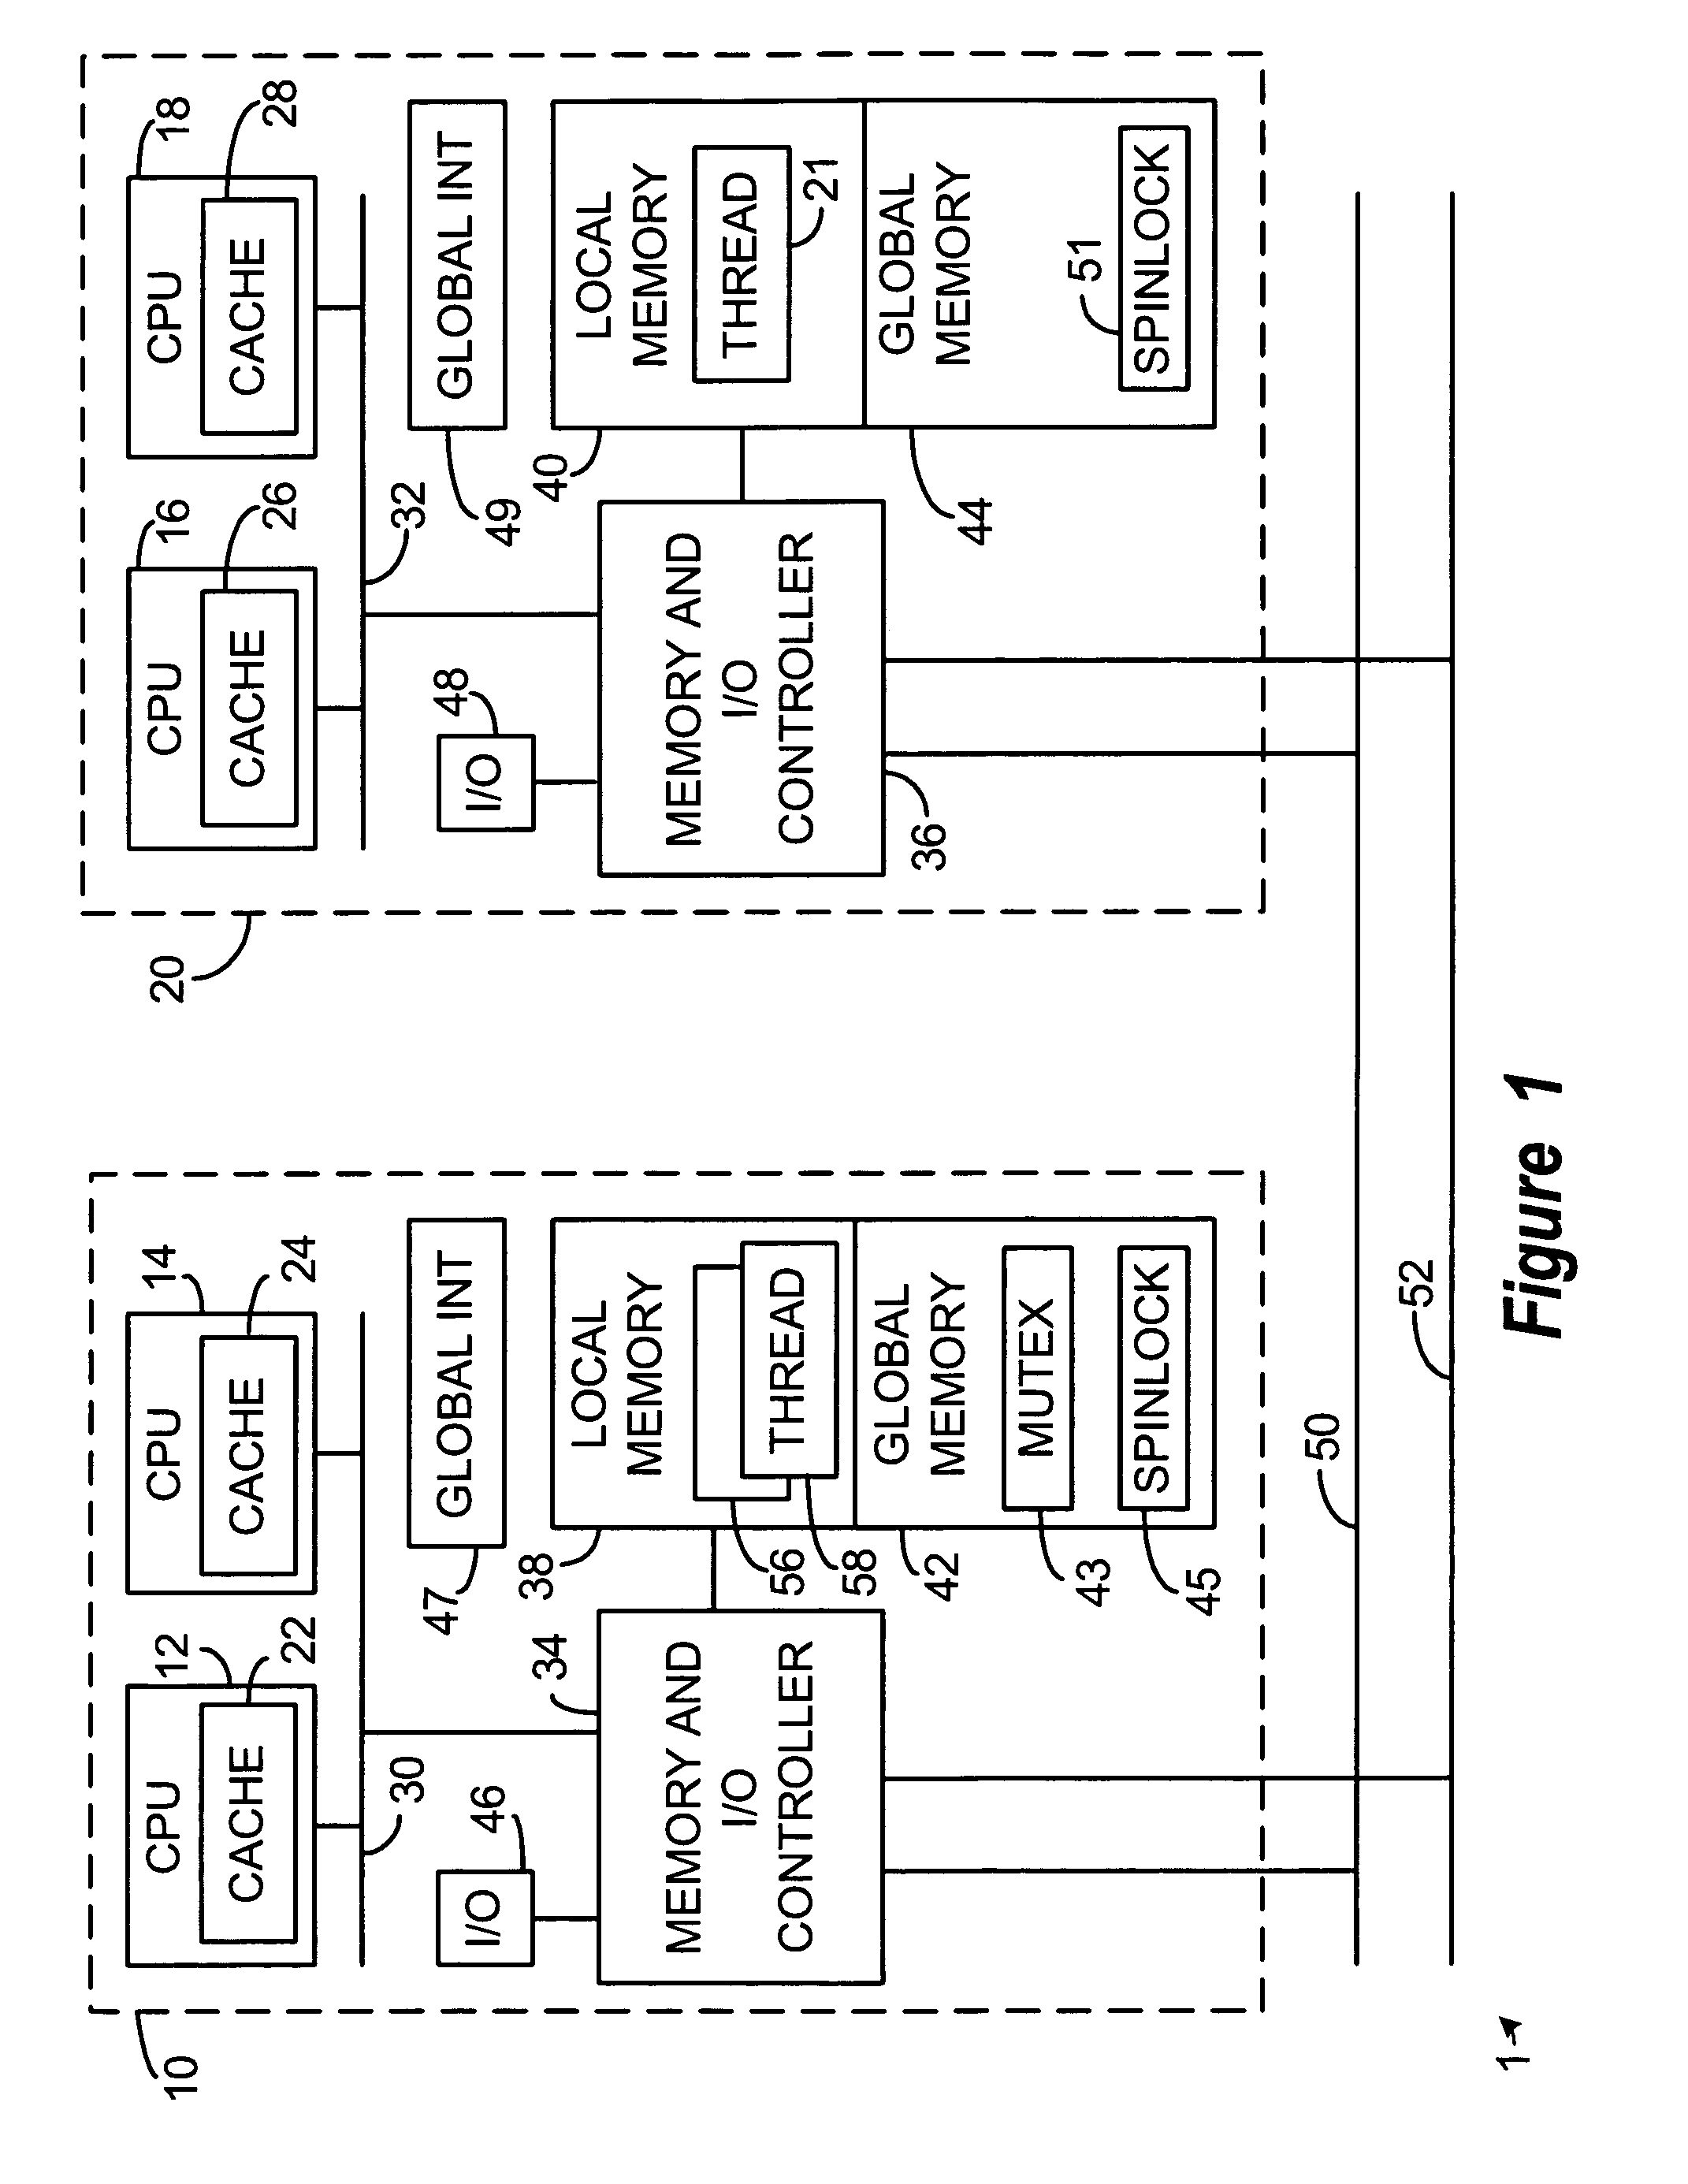 Synchronization objects for multi-computer systems